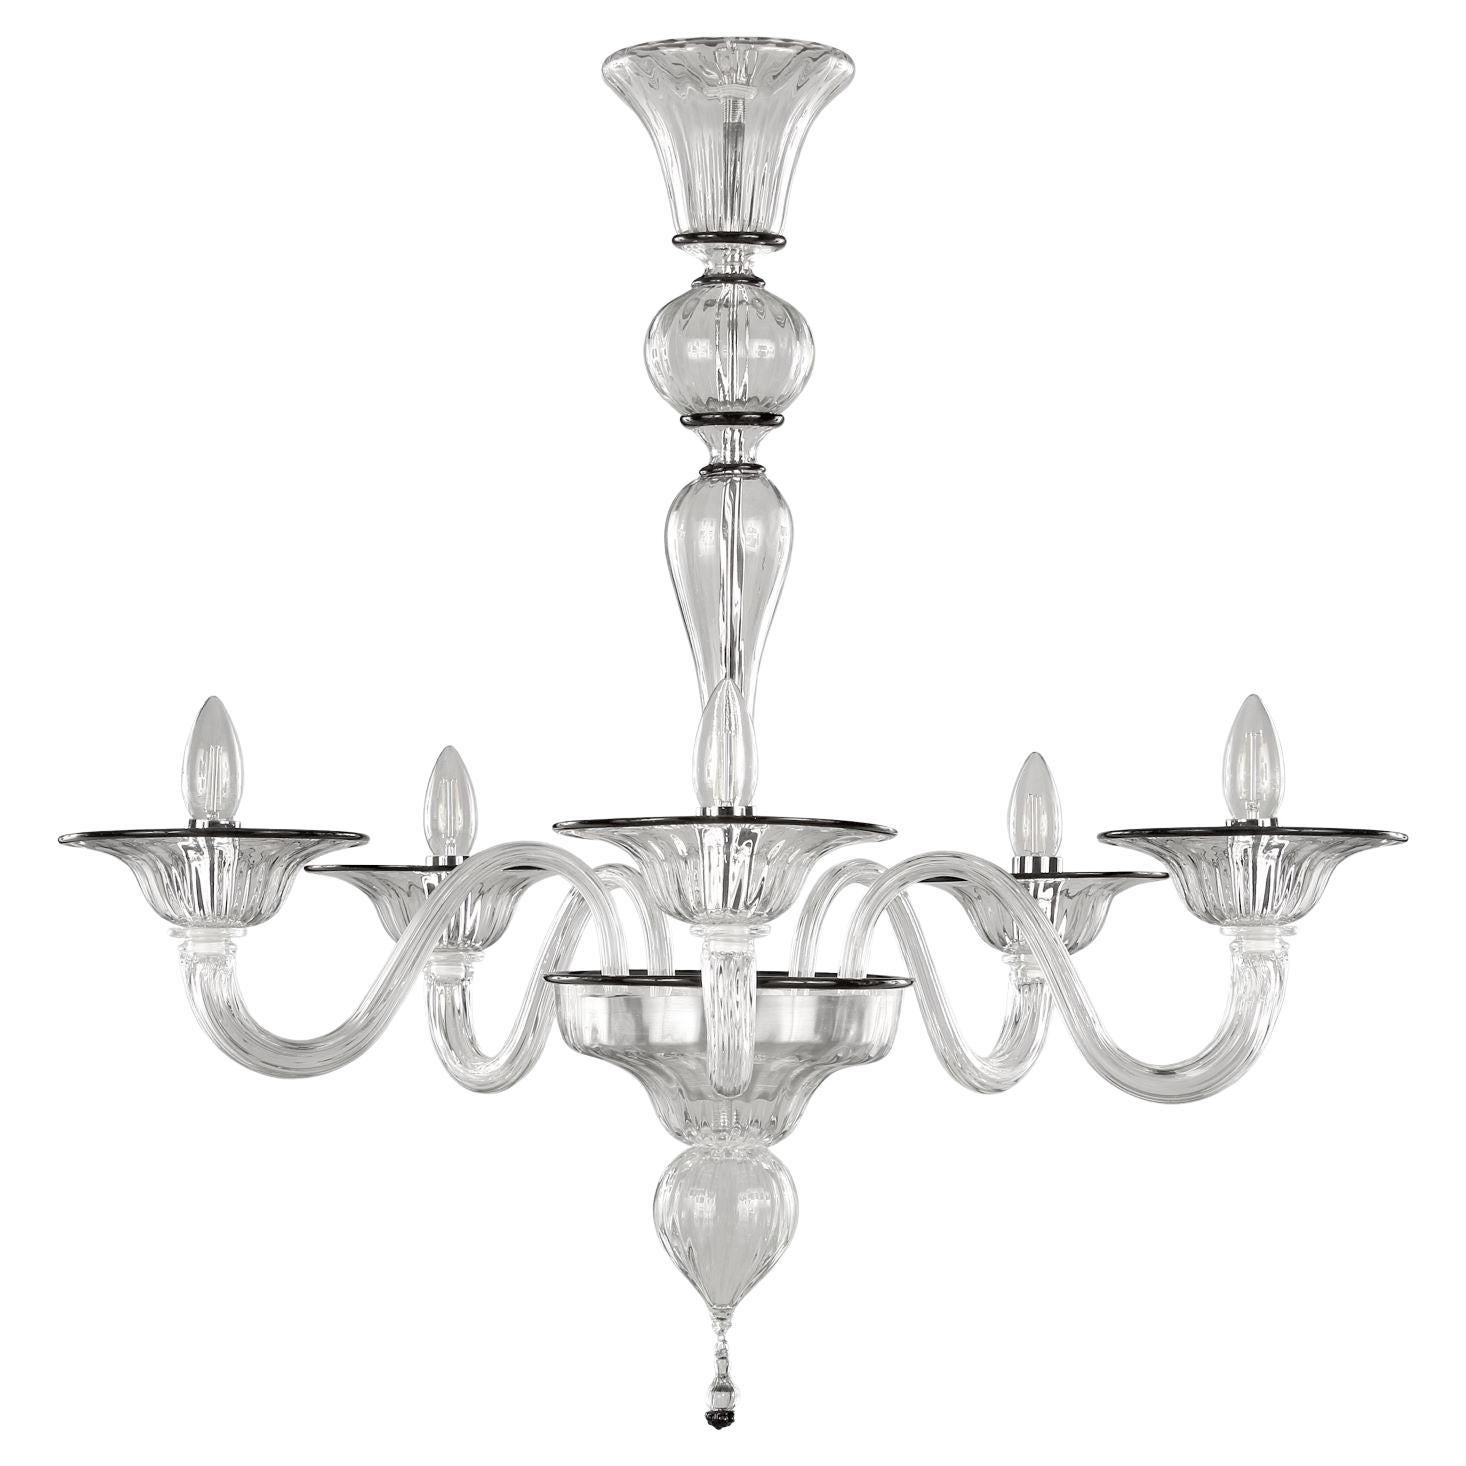 21st Century Chandelier, 5 Arms Crystal Murano Glass Black Details by Multiforme For Sale